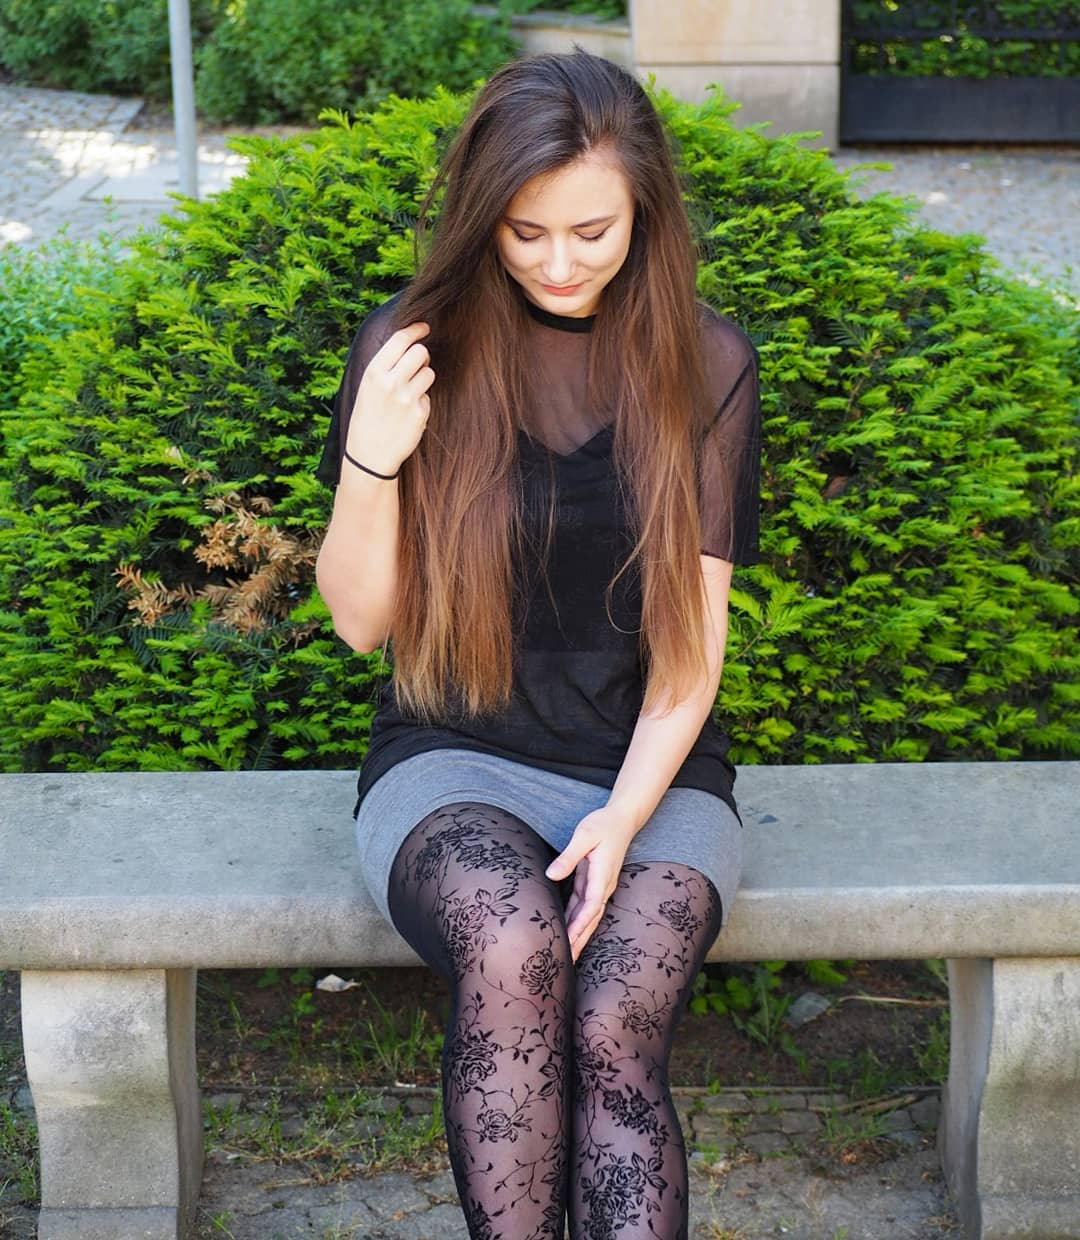 Insta Style Inspiration carllisse - Fashionmylegs : The tights and ...